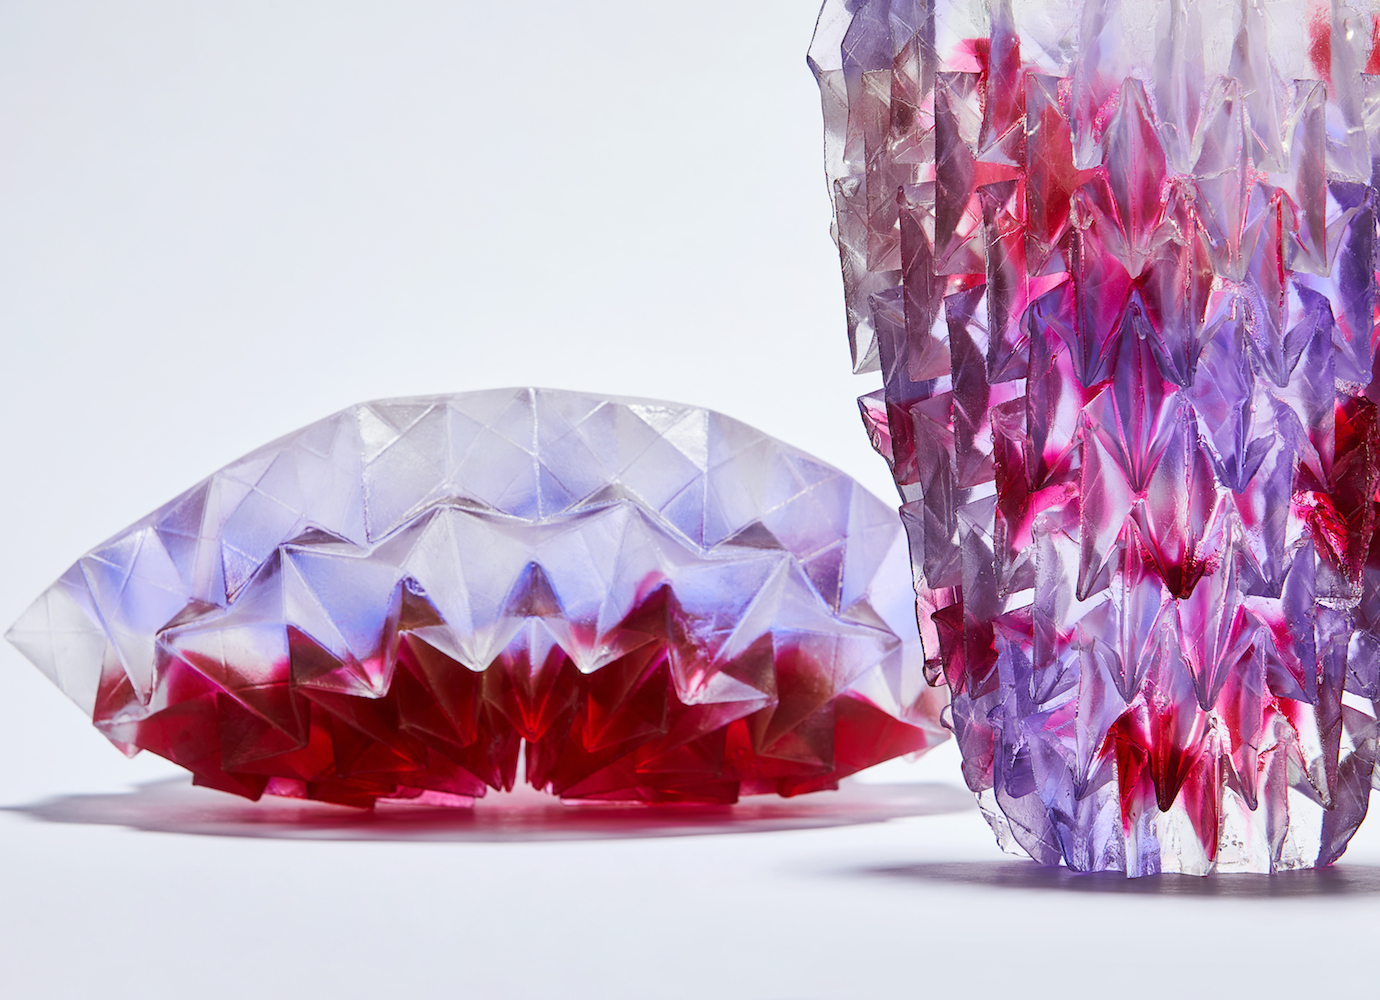 Translucent objects become metaphors for ambiguity at Tallinn’s Applied Art Triennial